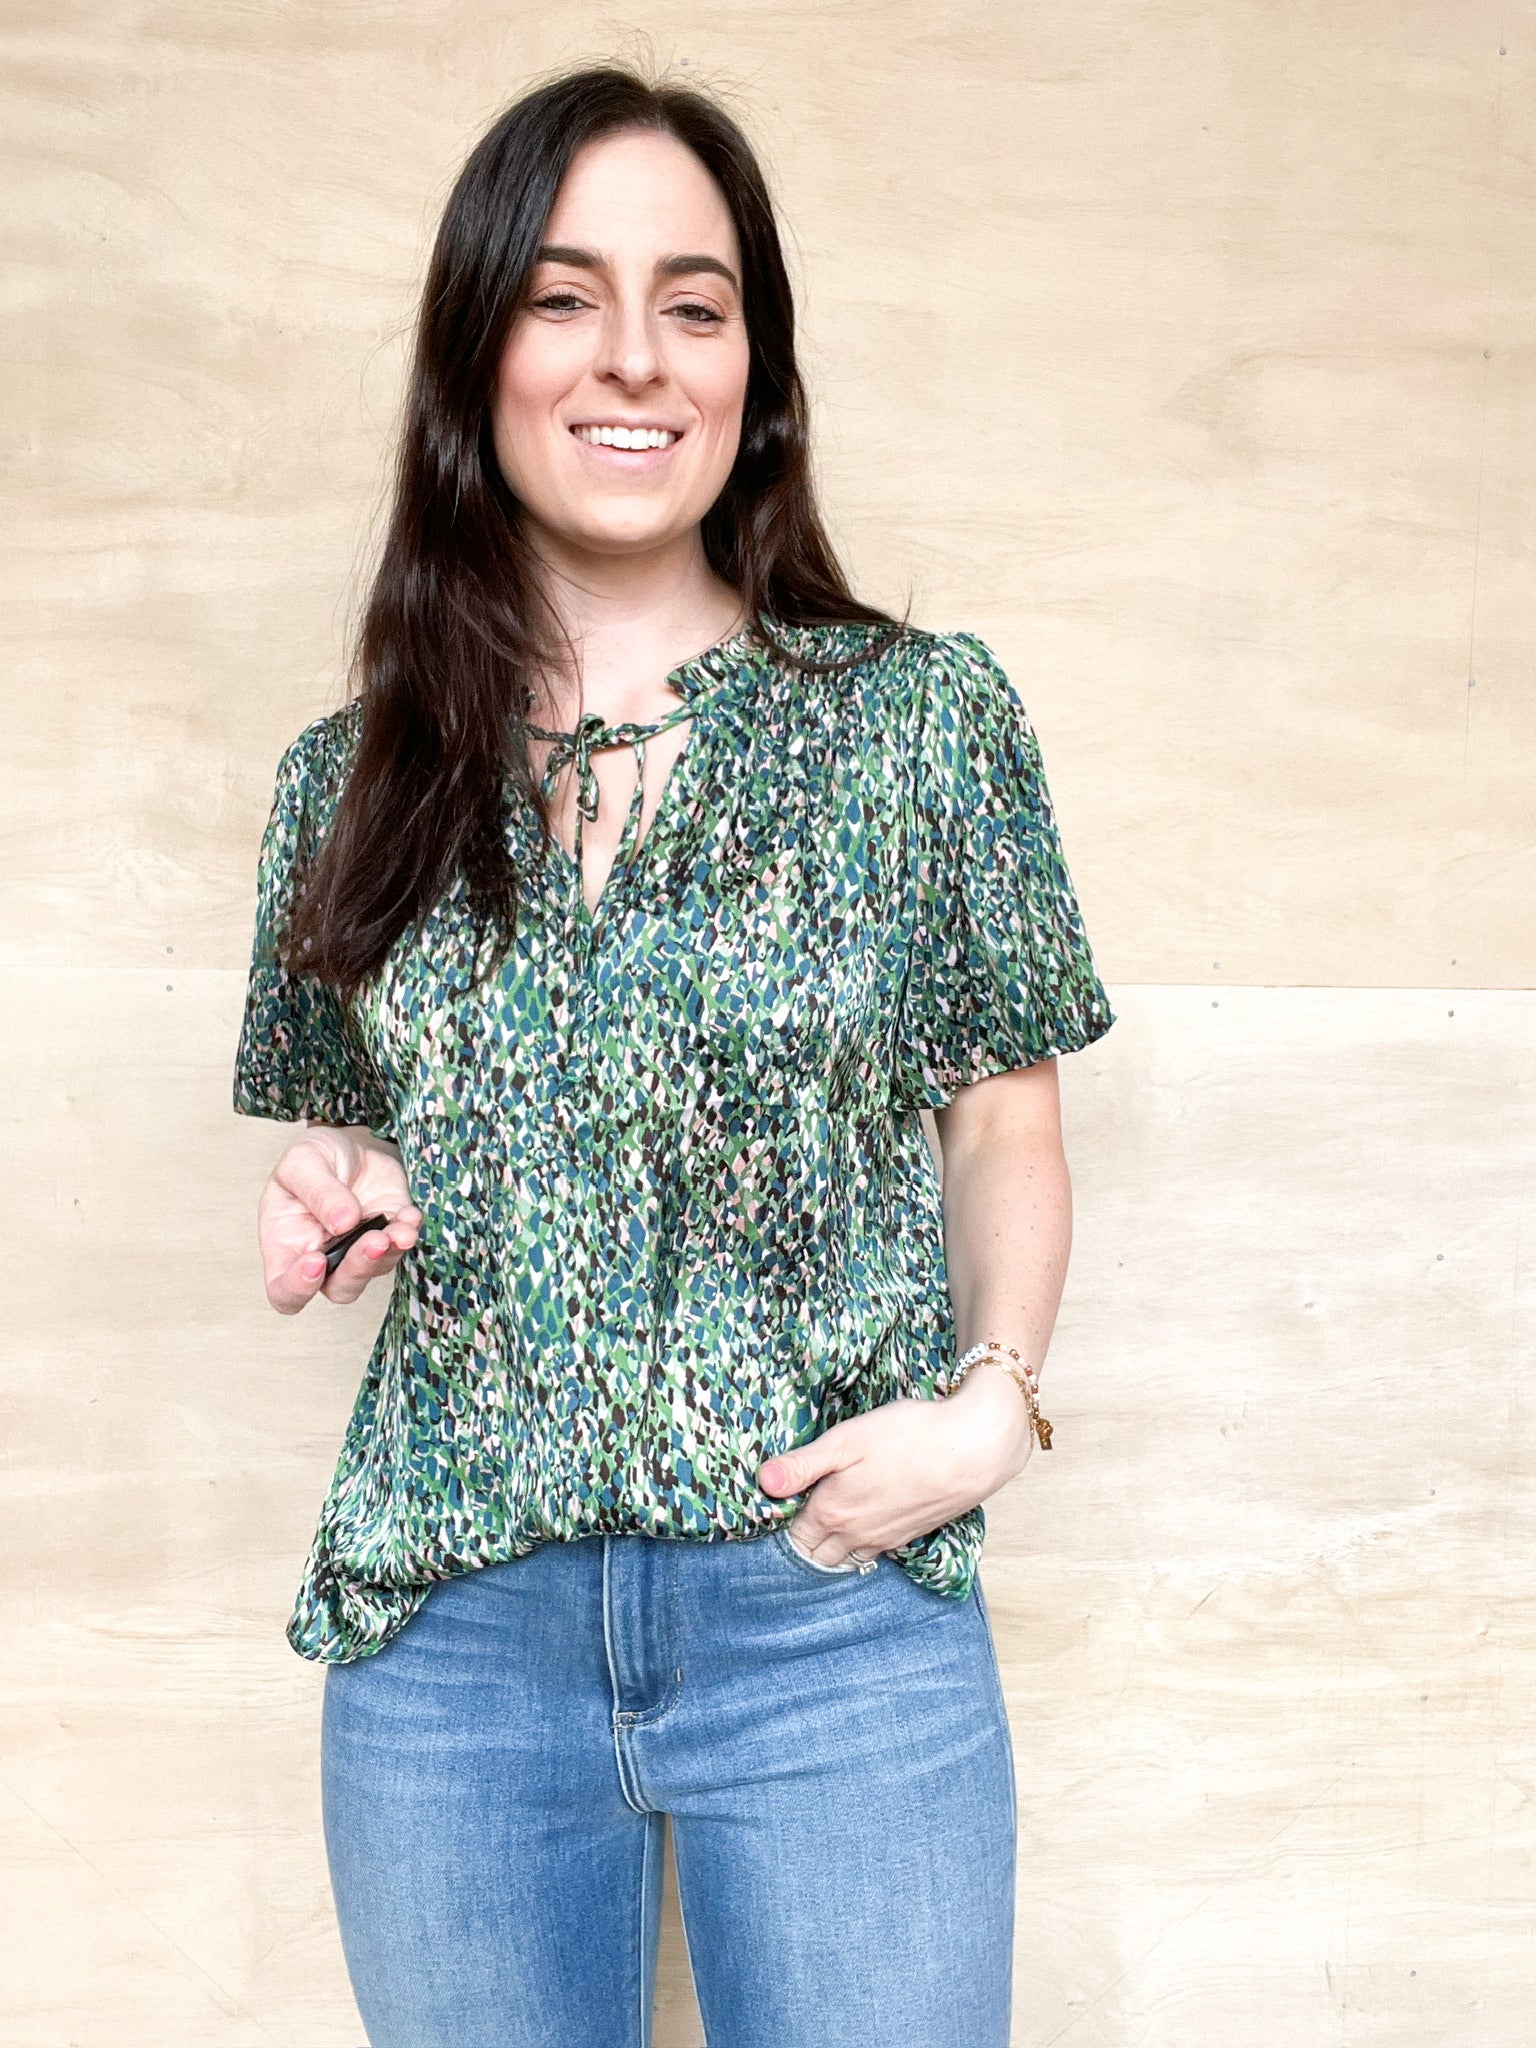 Short sleeve flowy blouse, green marbled coloring, frill neckline with a tie front, relaxed fitting in the body